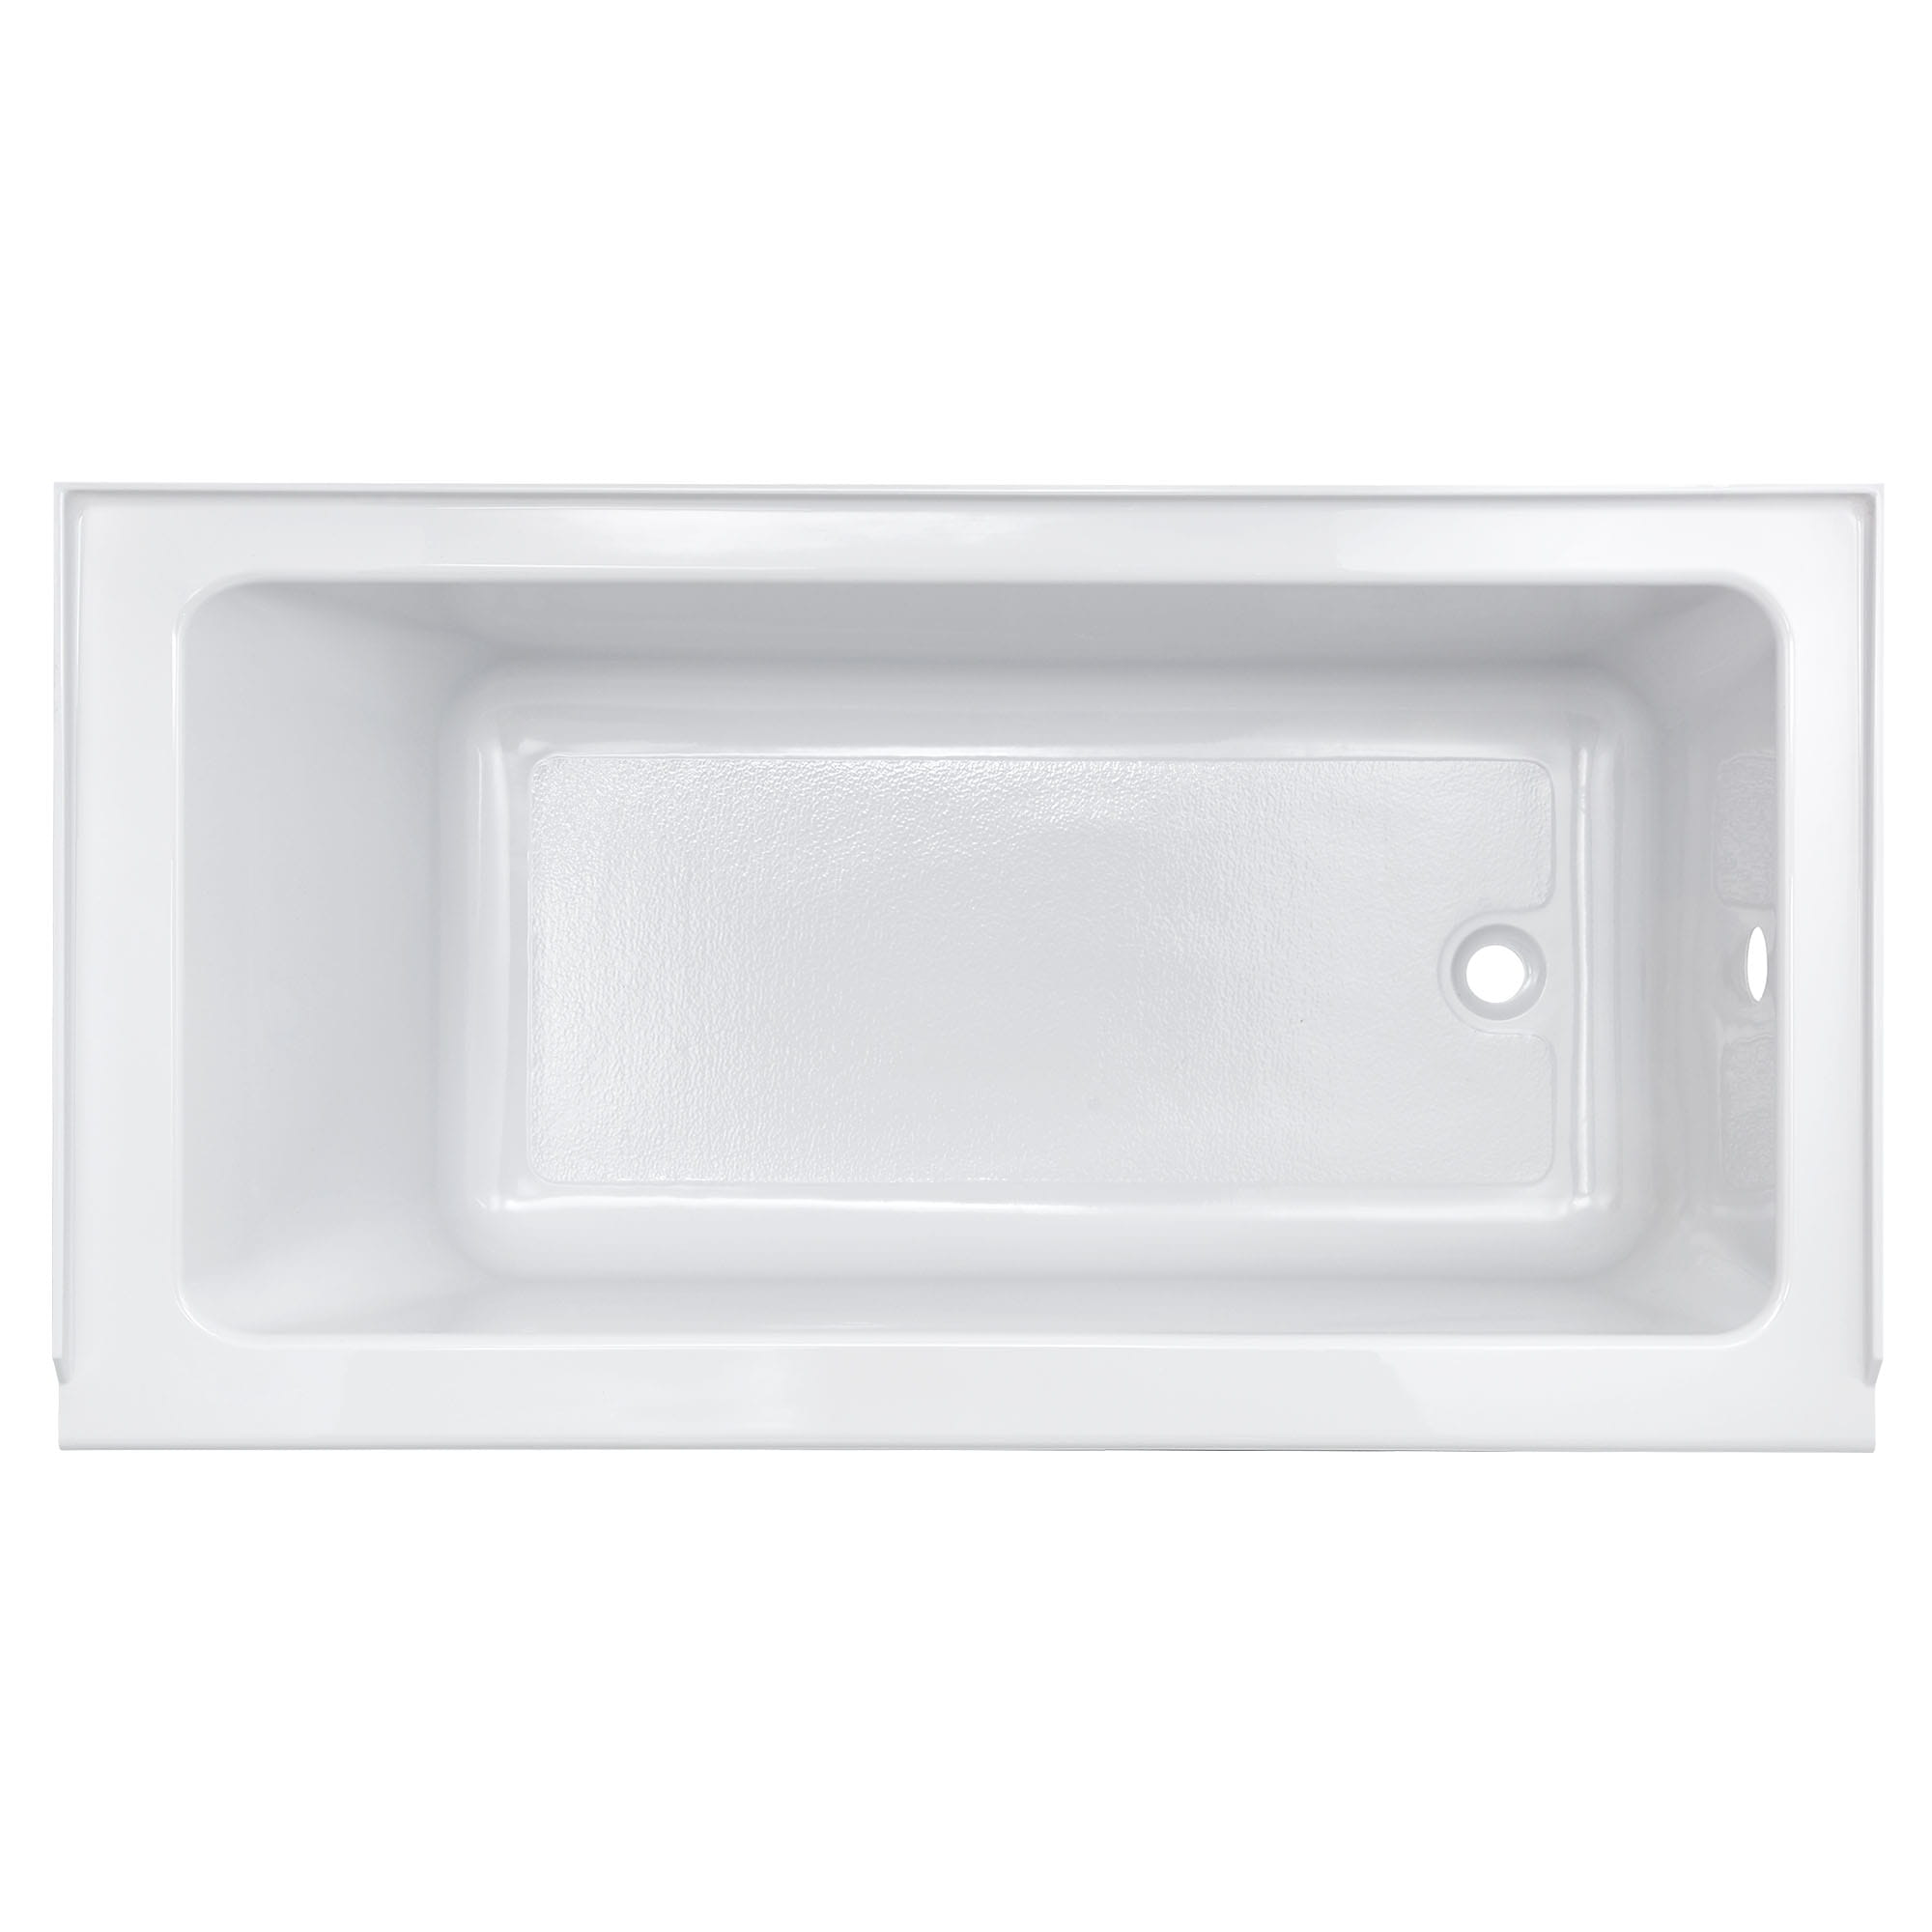 Studio 60 x 32 Inch Integral Apron Bathtub With Right Hand Outlet ARCTIC